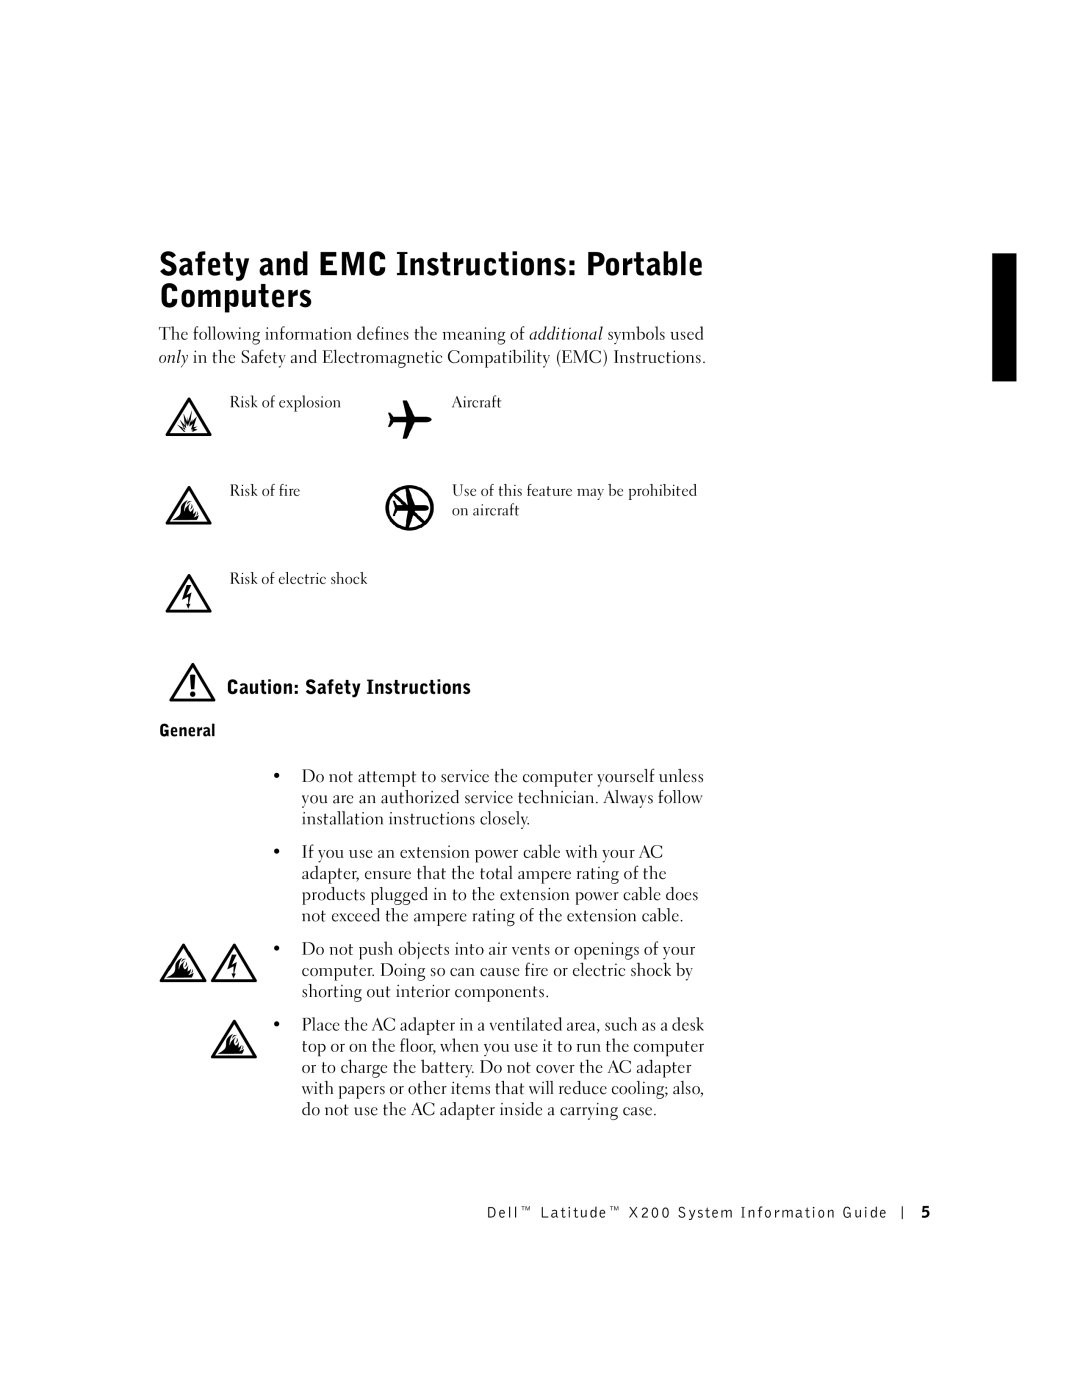 LeapFrog PP03S manual Safety and EMC Instructions Portable Computers, General, Dell Latitude X200 System Information Guide 